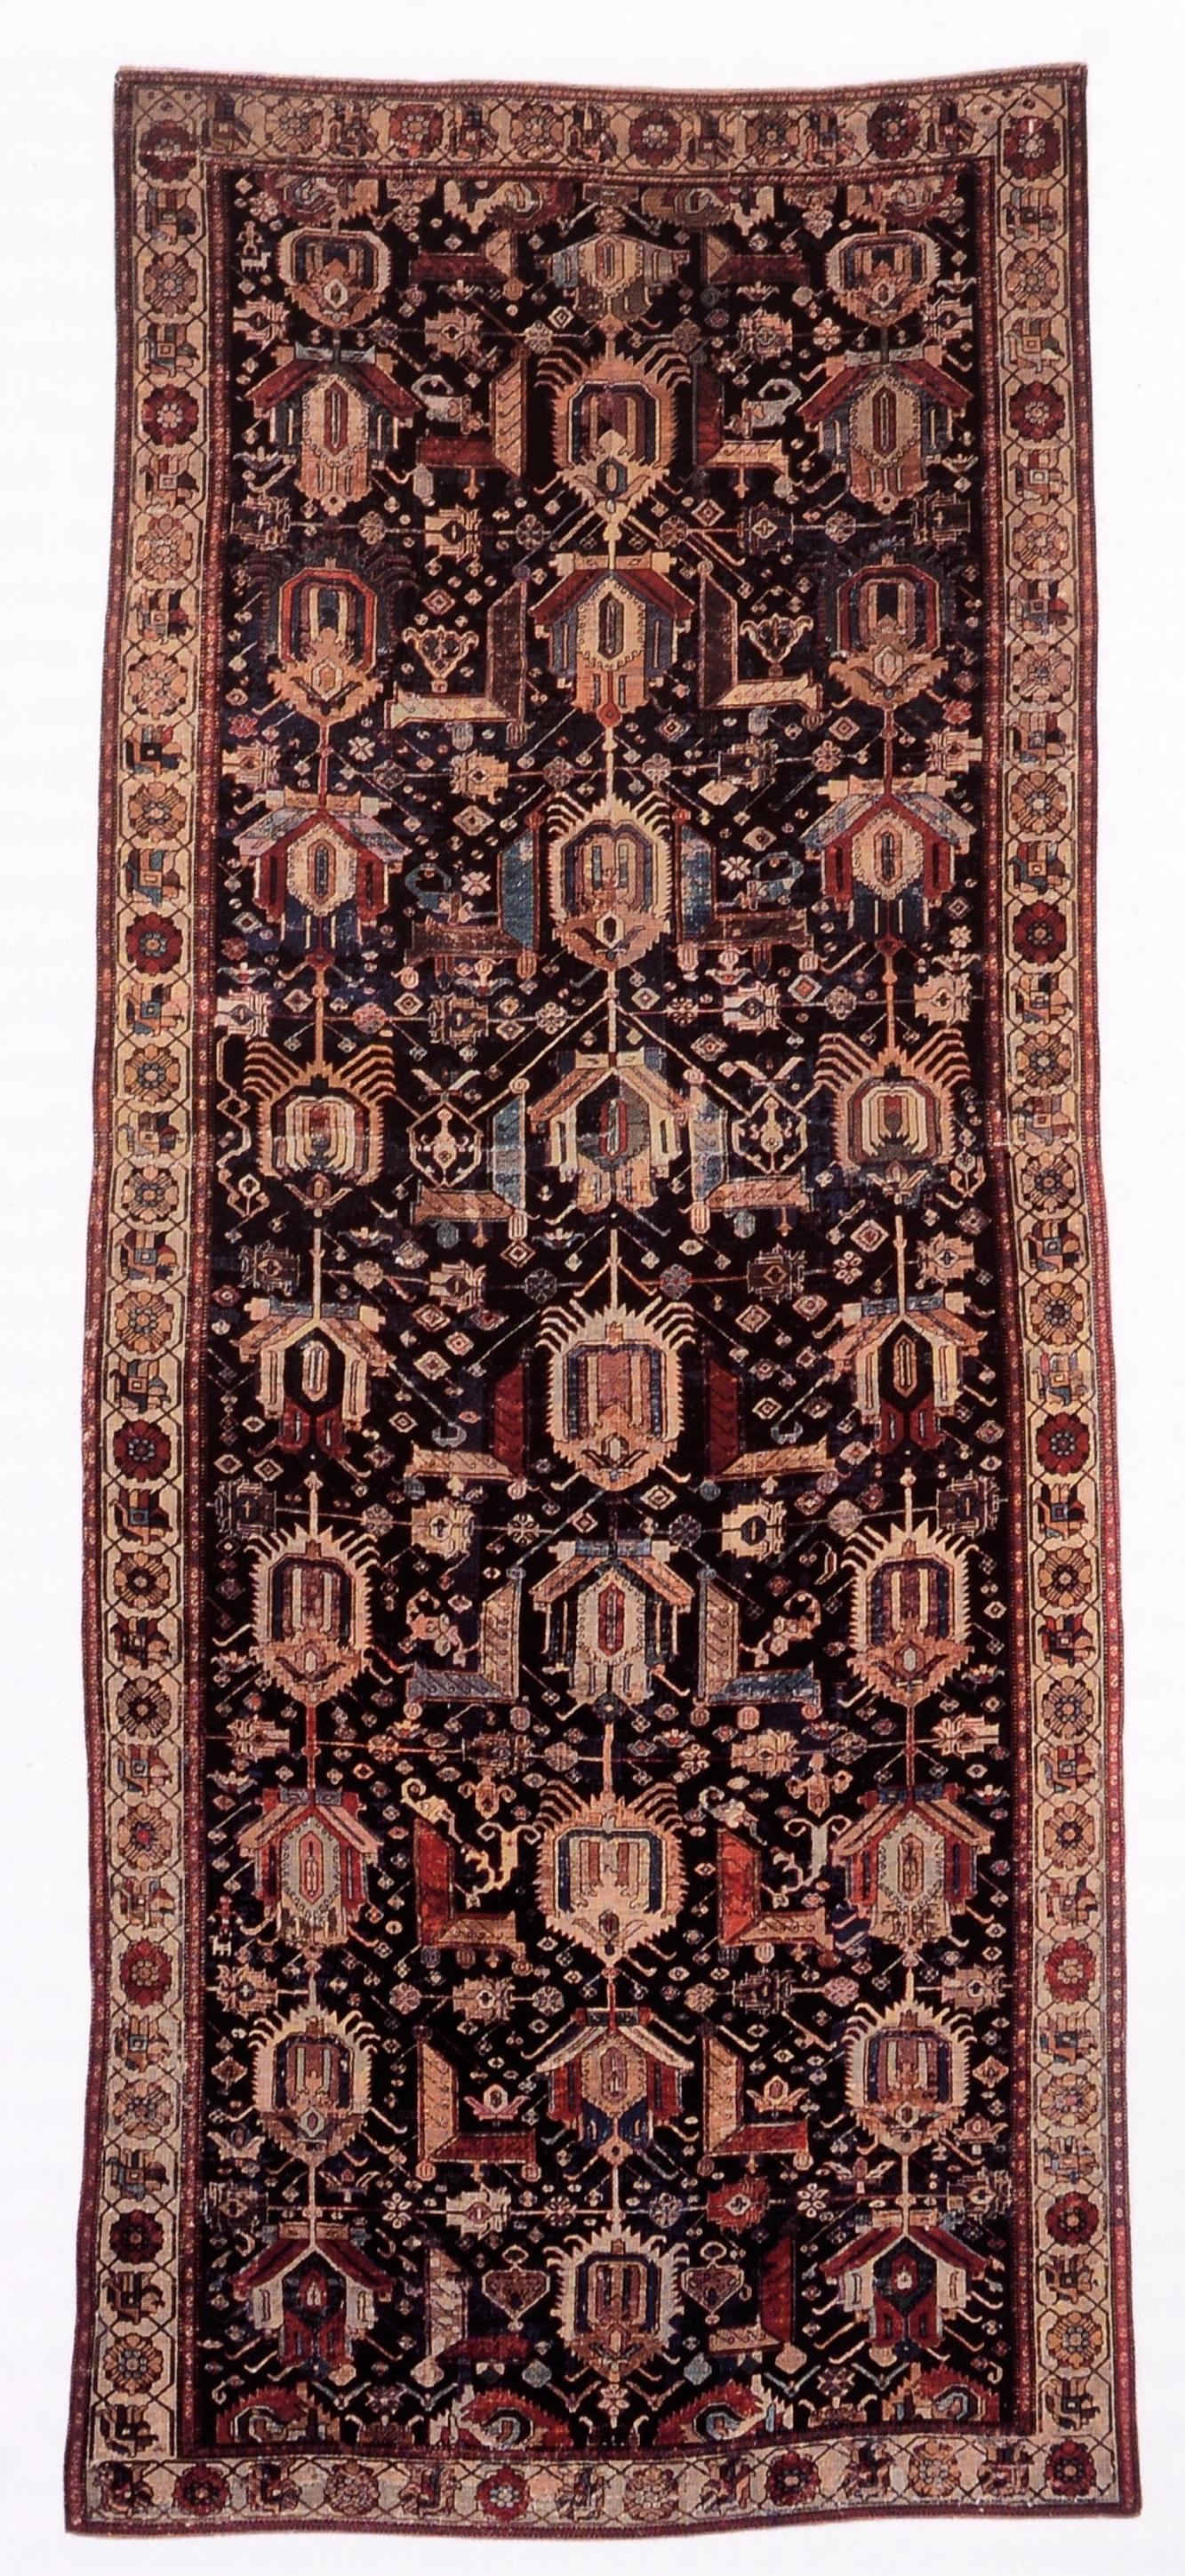 Heaven in a Carpet. Snoeck-Ducaji & Zoon, 2004. Exhibition catalogue of classic rugs: 15th-19th centuries, from a variety of museums and private collections. Exhibited at the Institut du Monde Arabe, Paris, 12/07-3/27, 2005. Calouste Gulbenkian